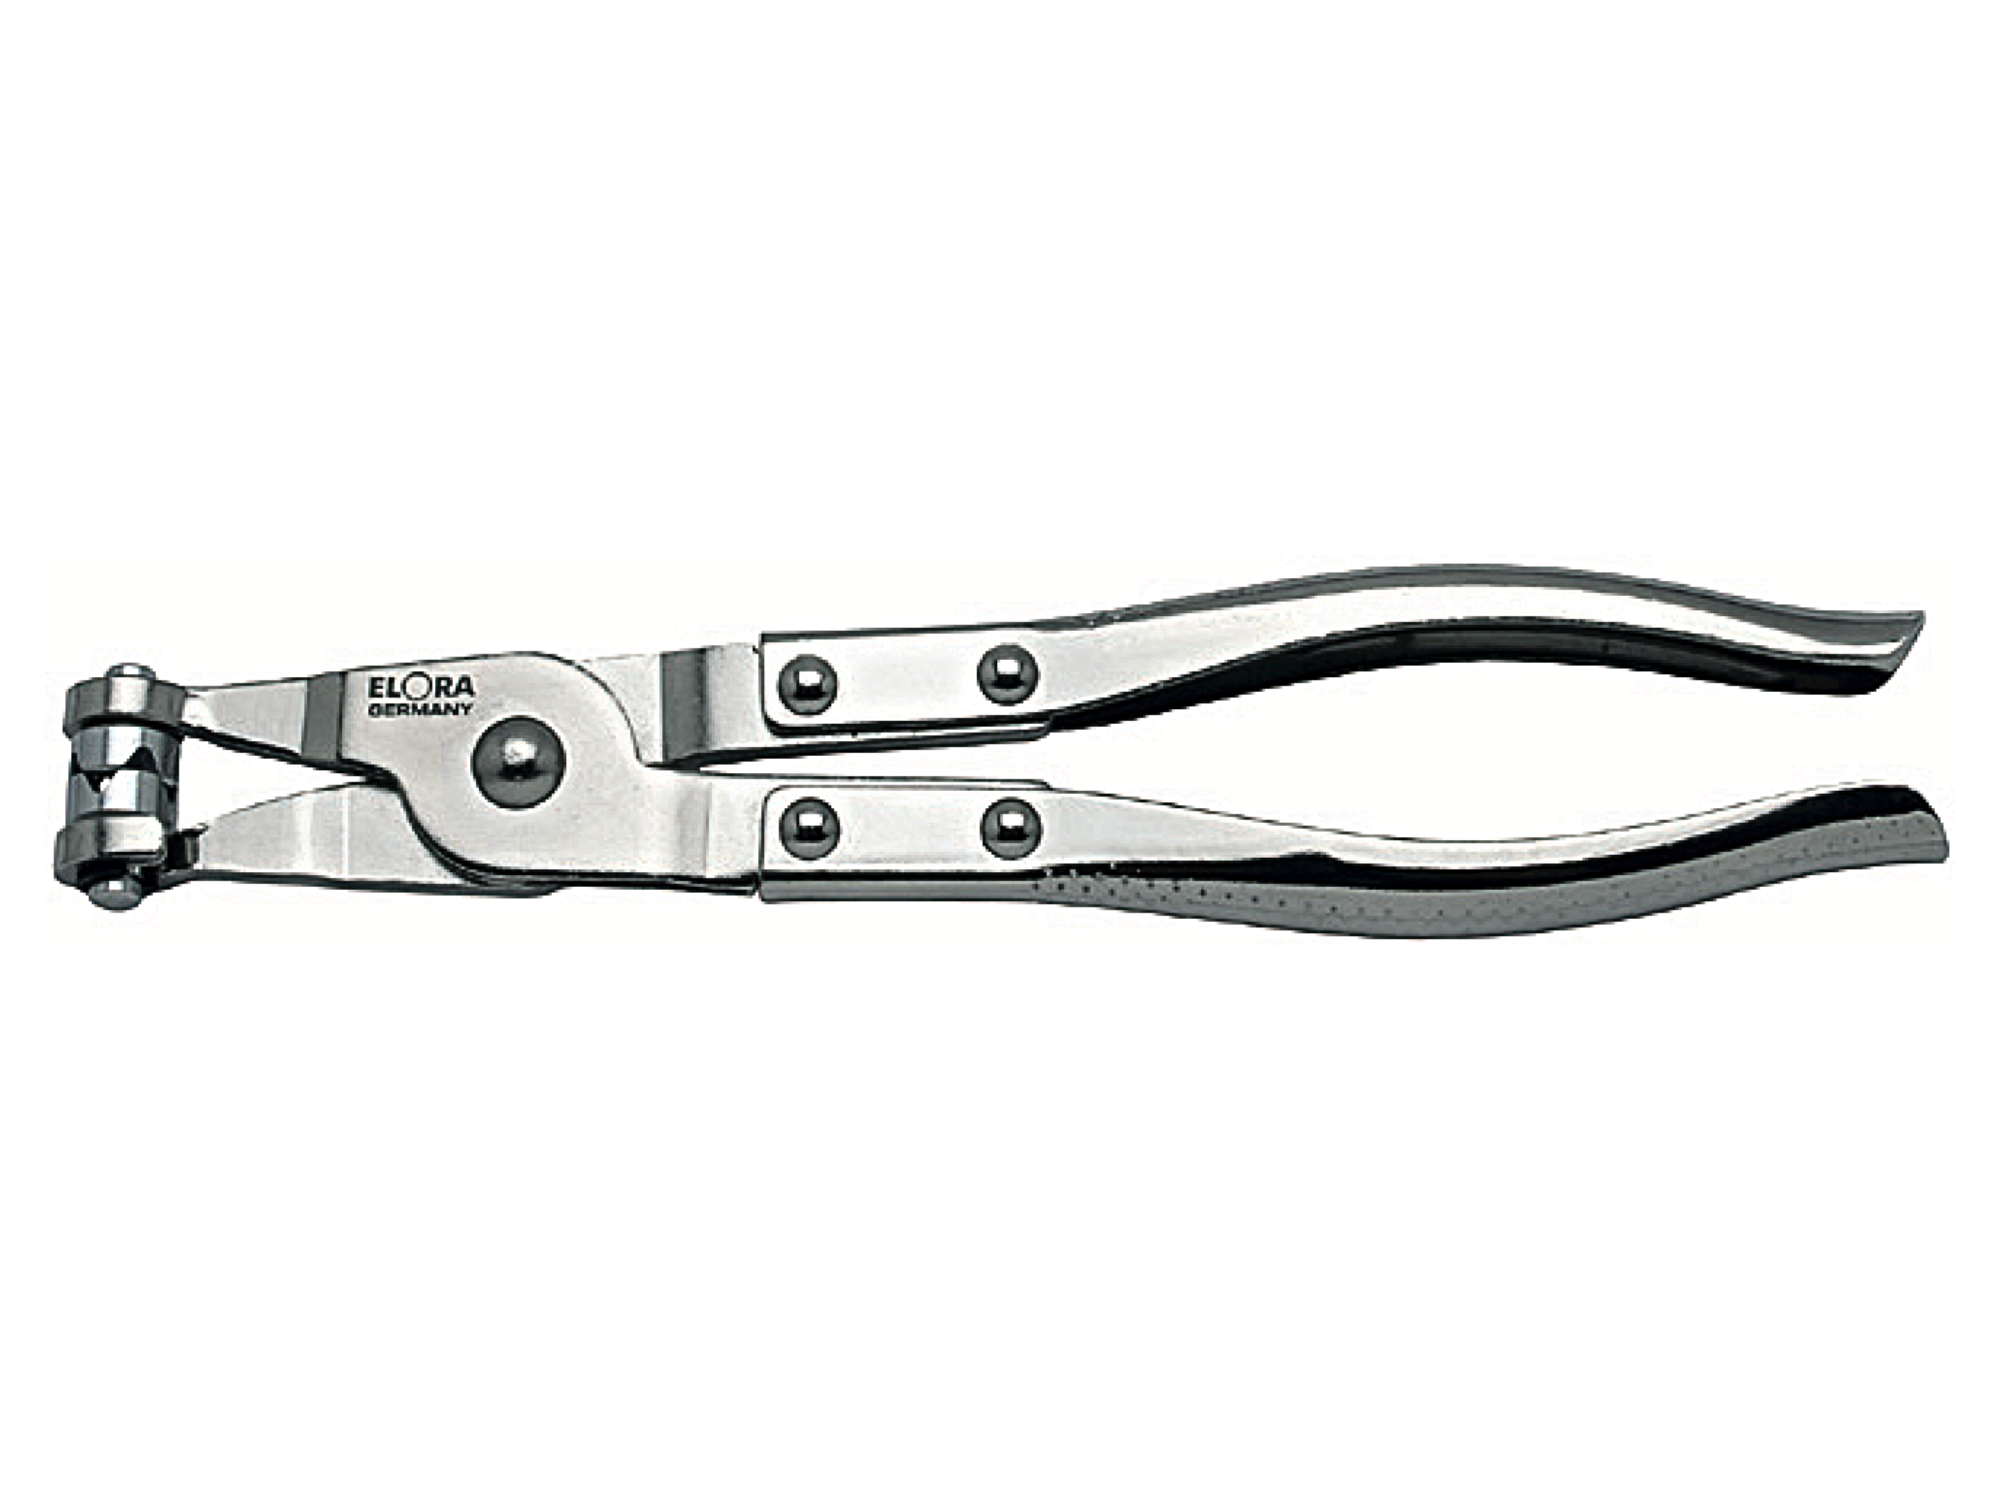 ELORA 244-3 Hose Clamp Plier (ELORA Tools) - Premium Hose Clamp Plier from ELORA - Shop now at Yew Aik.